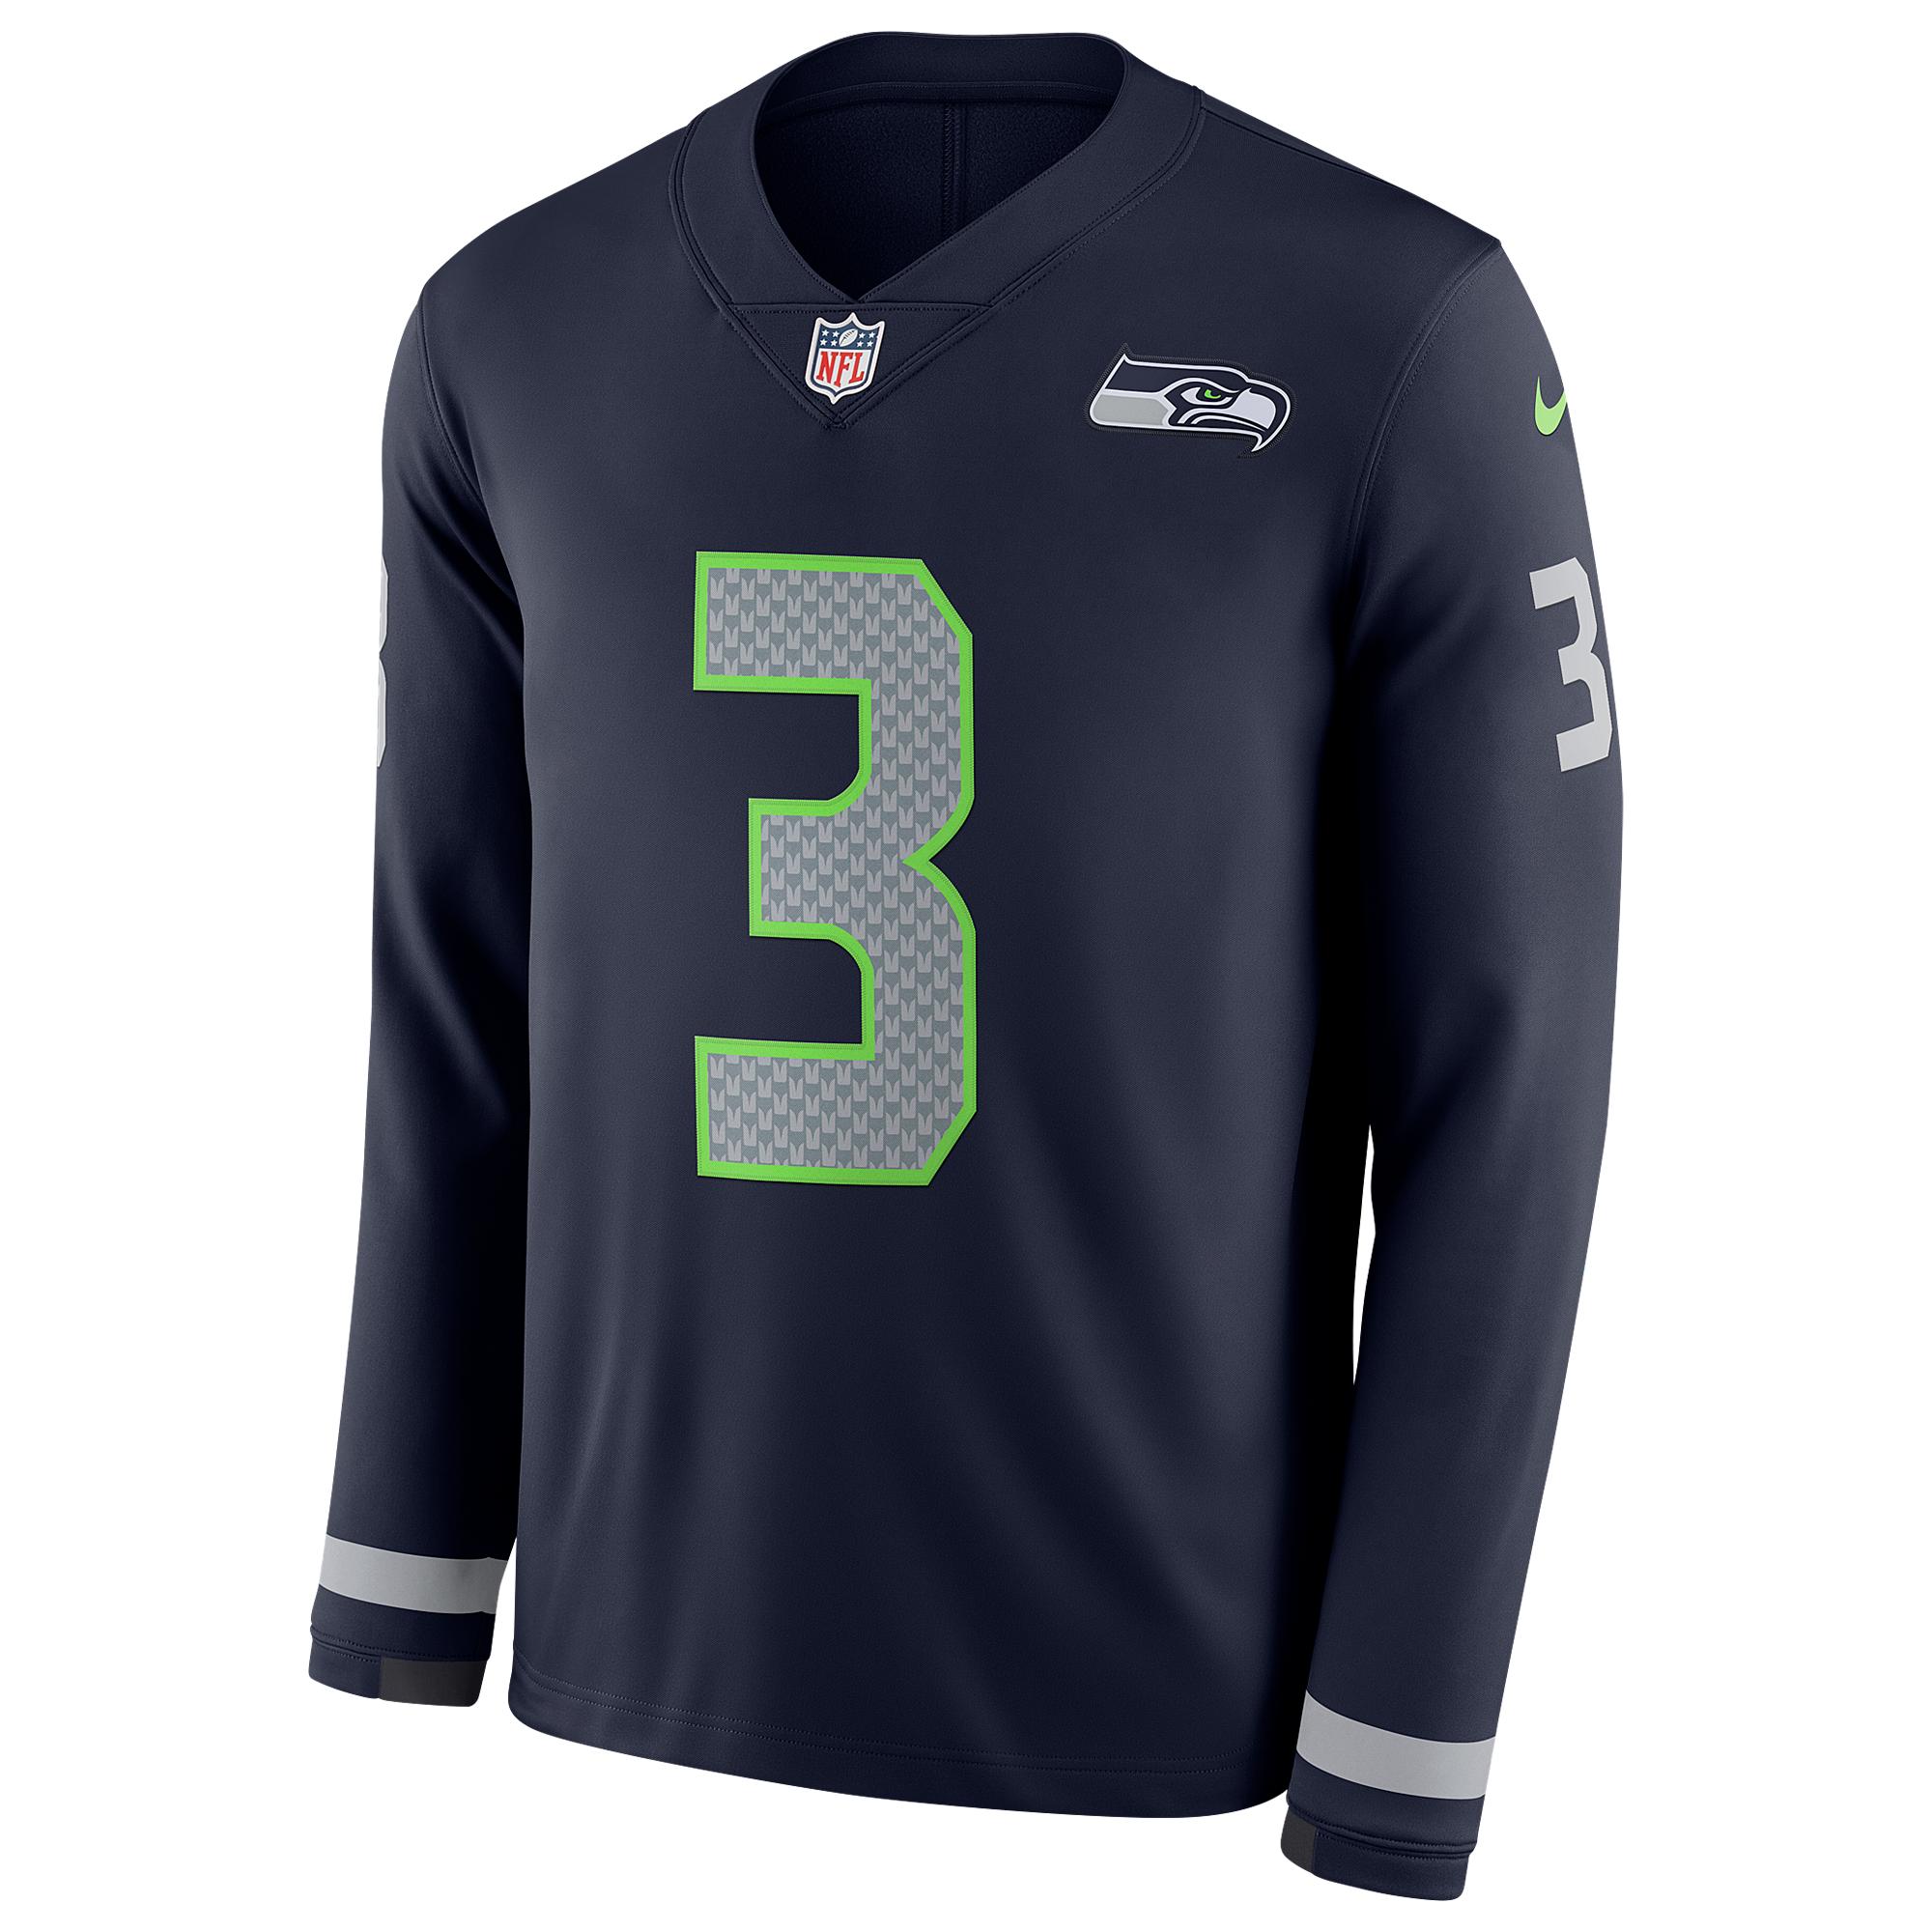 Nike Synthetic Nfl Therma Jersey in 